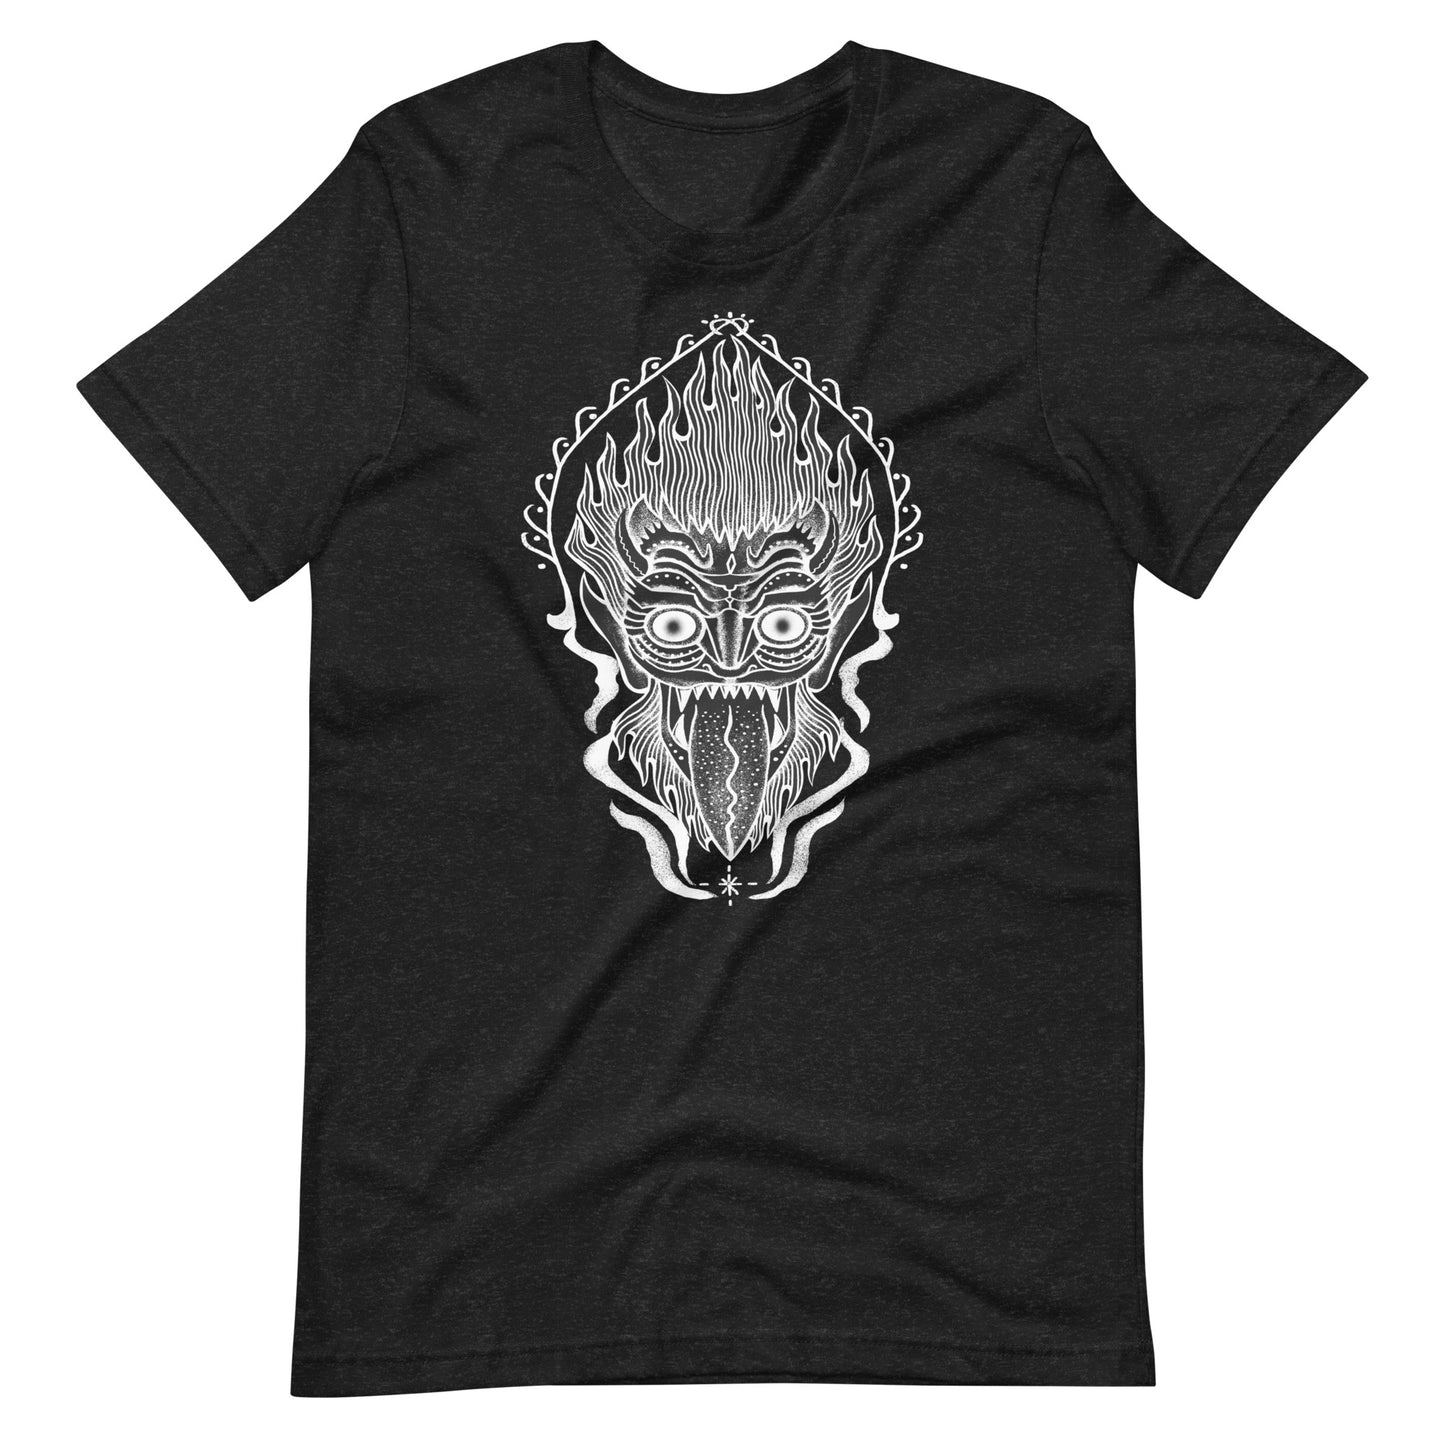 King of Fire - Men's t-shirt - Black Heather Front